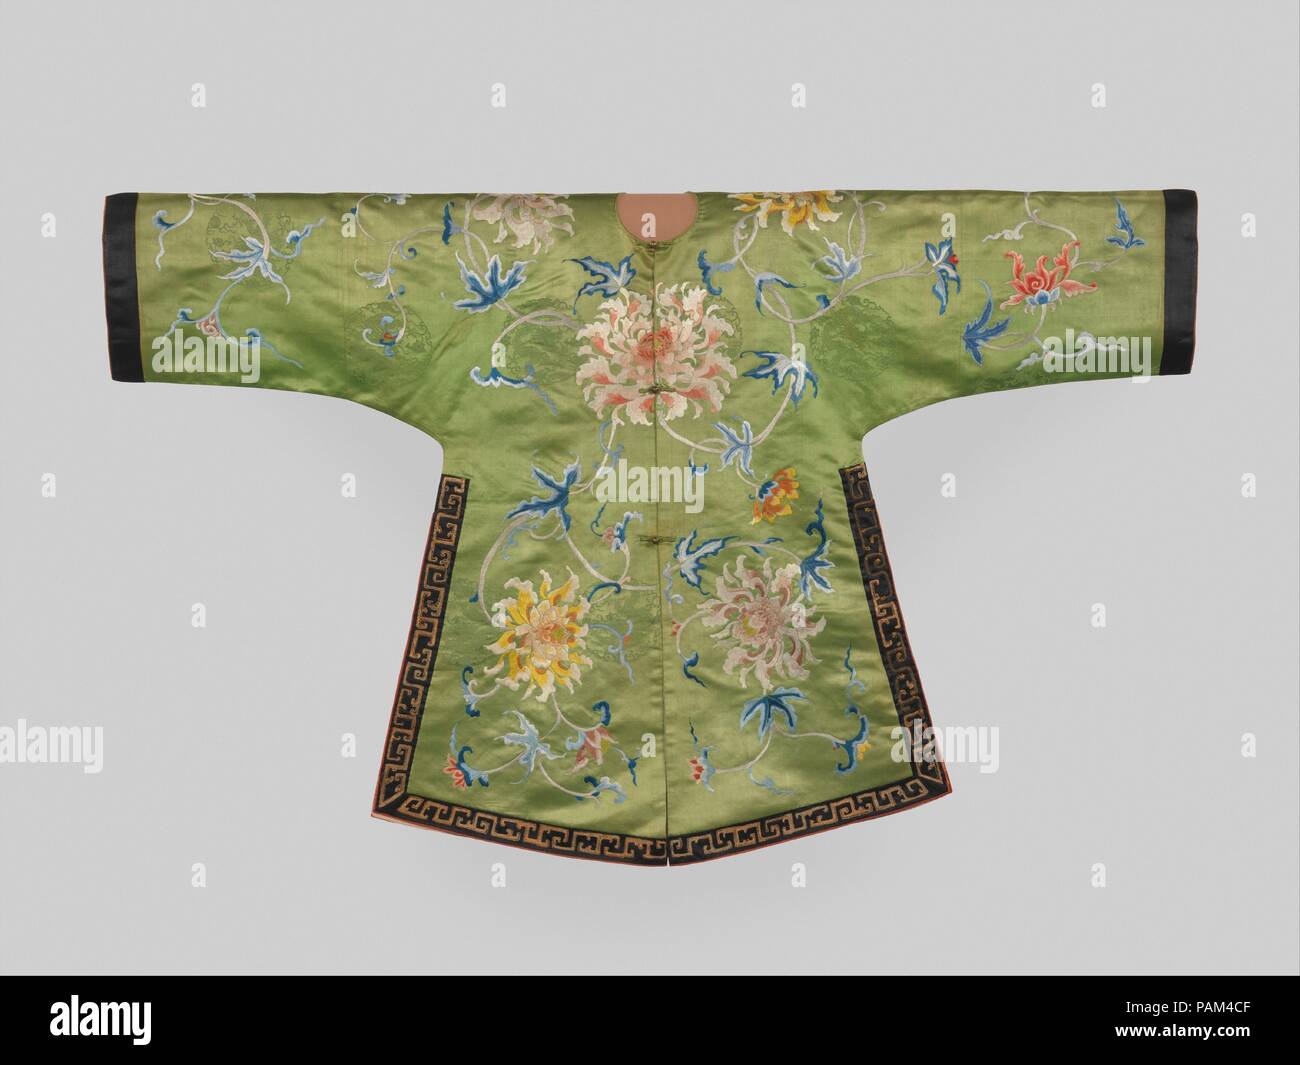 Jacket for a Theatrical Costume. Culture: China. Dimensions: 30 1/2 x 51 1/2 in. (77.5 x 130.8 cm). Date: 18th century.  Three of these exquisite jackets are known to exist: two are in the collection of the Metropolitan Museum and a third is in the Qing court collection of theatrical costumes of the Palace Museum, Beijing. All three have the same delicate floral pattern and identical seals and inscriptions on their linings.   The jackets were made in the textile bureau in Suzhou as tribute objects for the imperial court. They were part of an ensemble, perhaps with a skirt or other garment, and Stock Photo